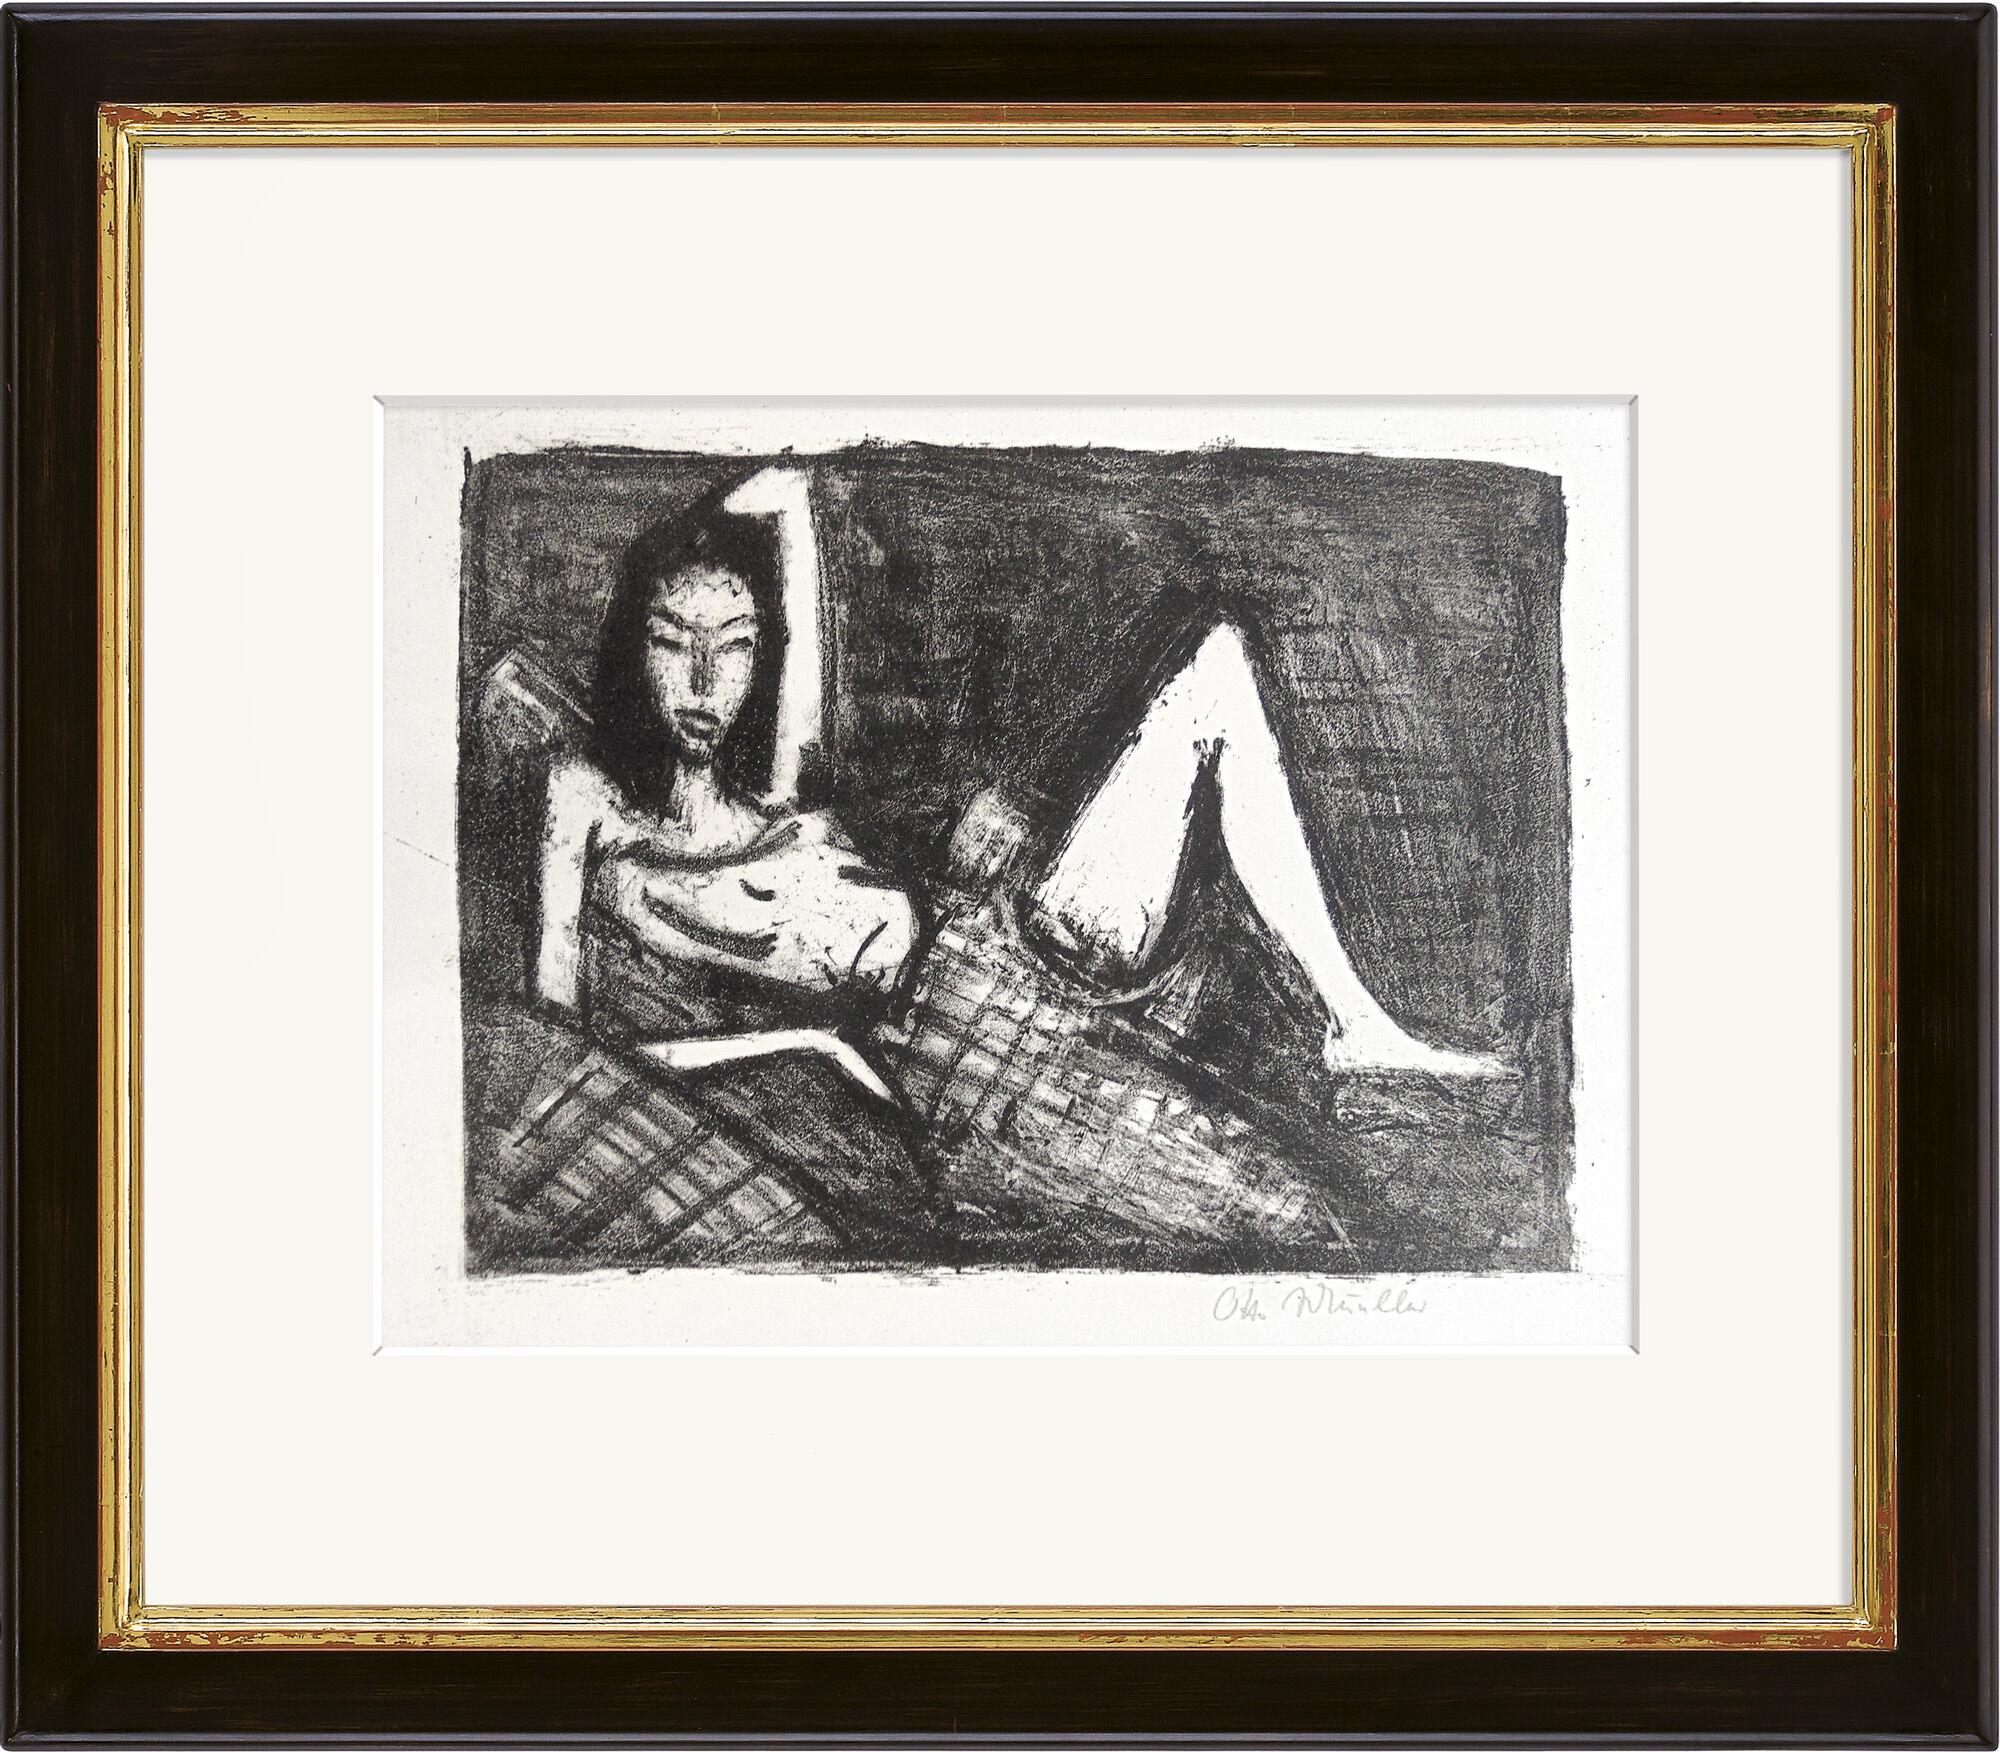 Picture "Girl on the Sofa" (1921/22) by Otto Mueller